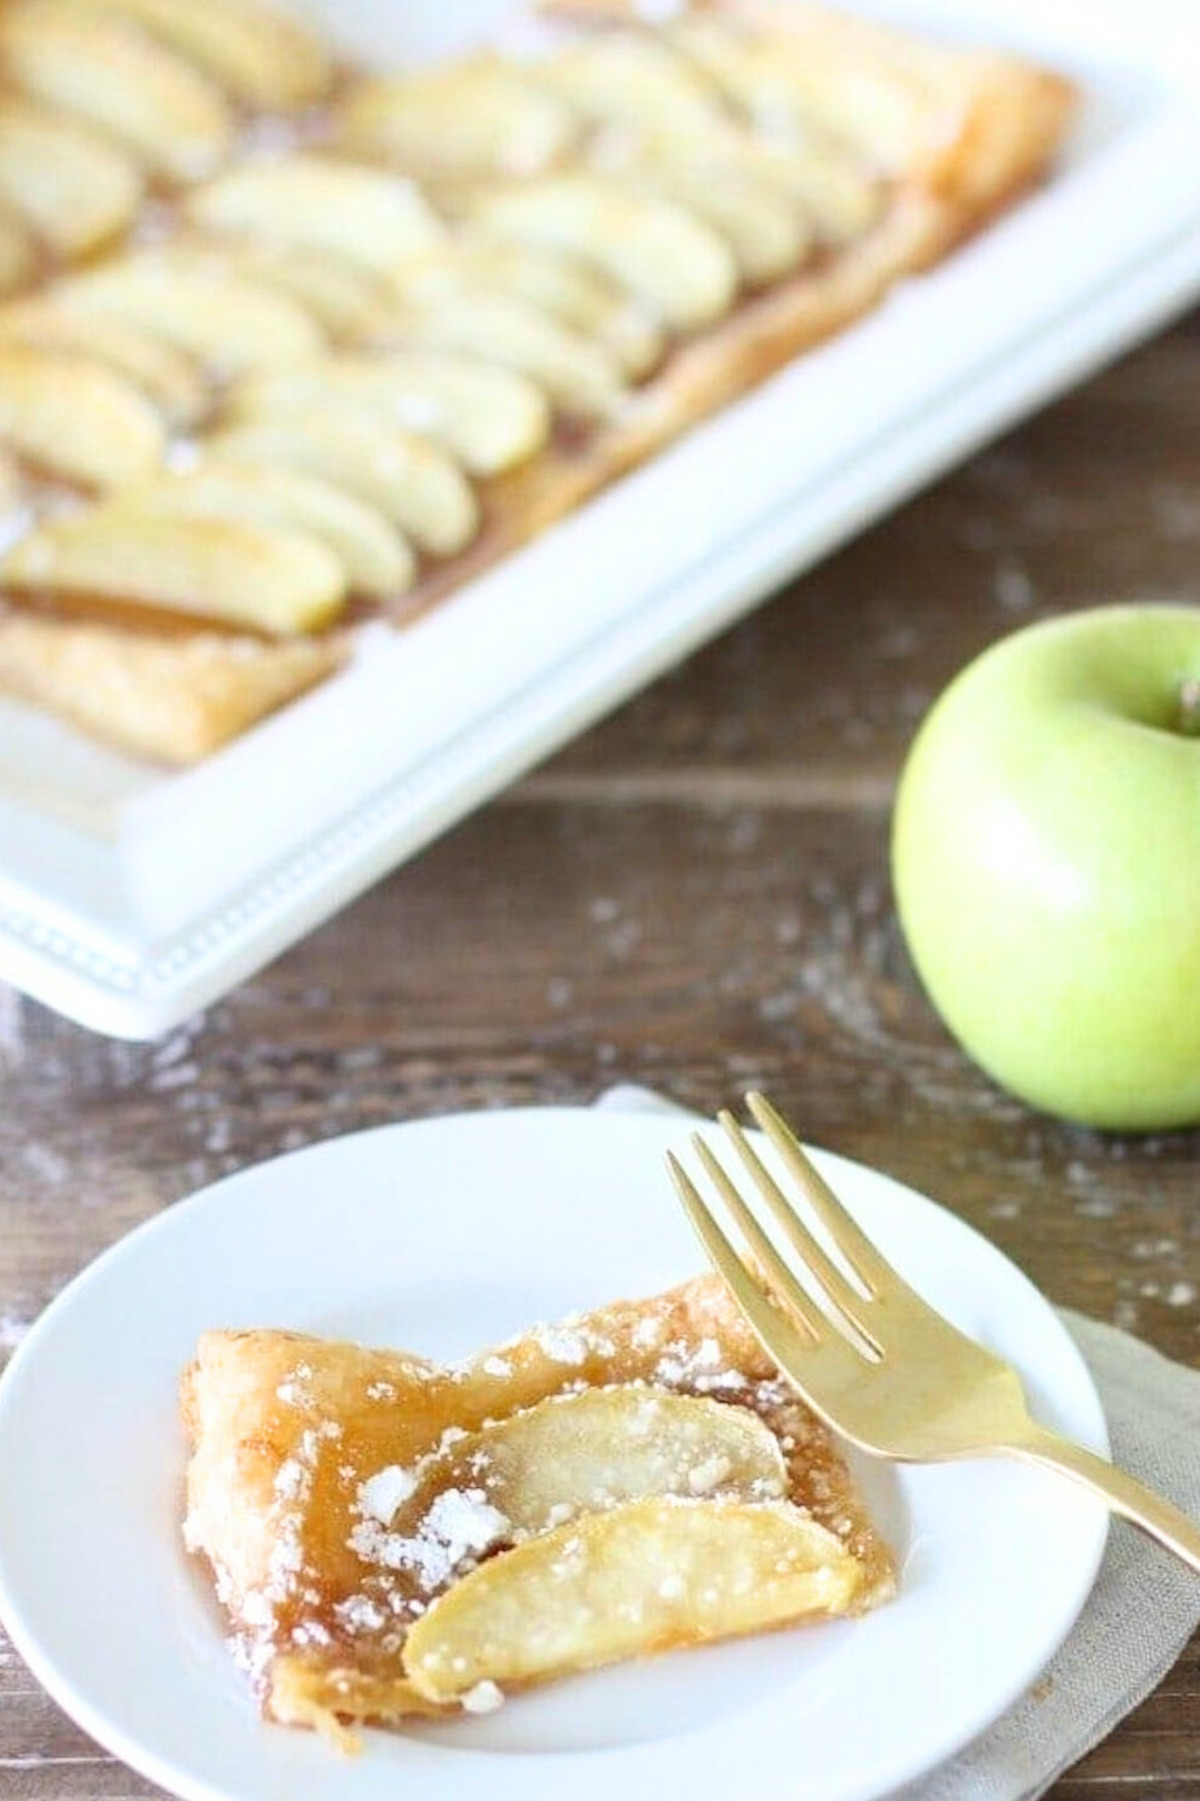 A slice of apple tart 
with powdered sugar on a plate, perfect for apple recipes.